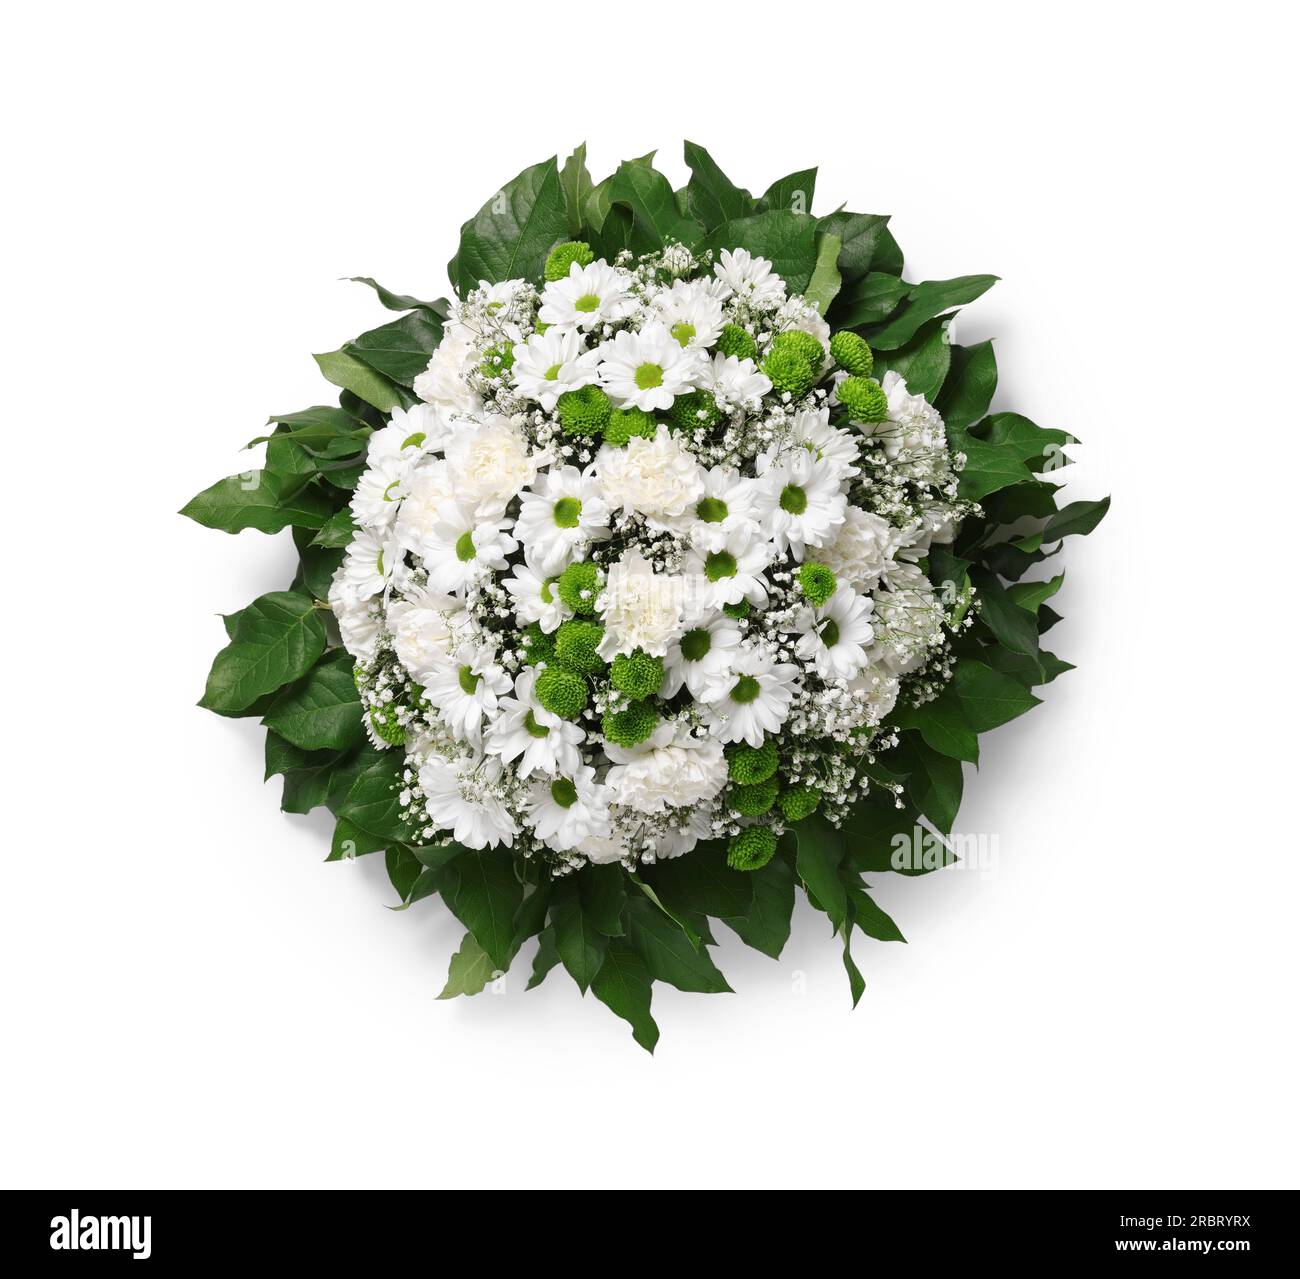 Funeral wreath of flowers on white background, top view Stock Photo